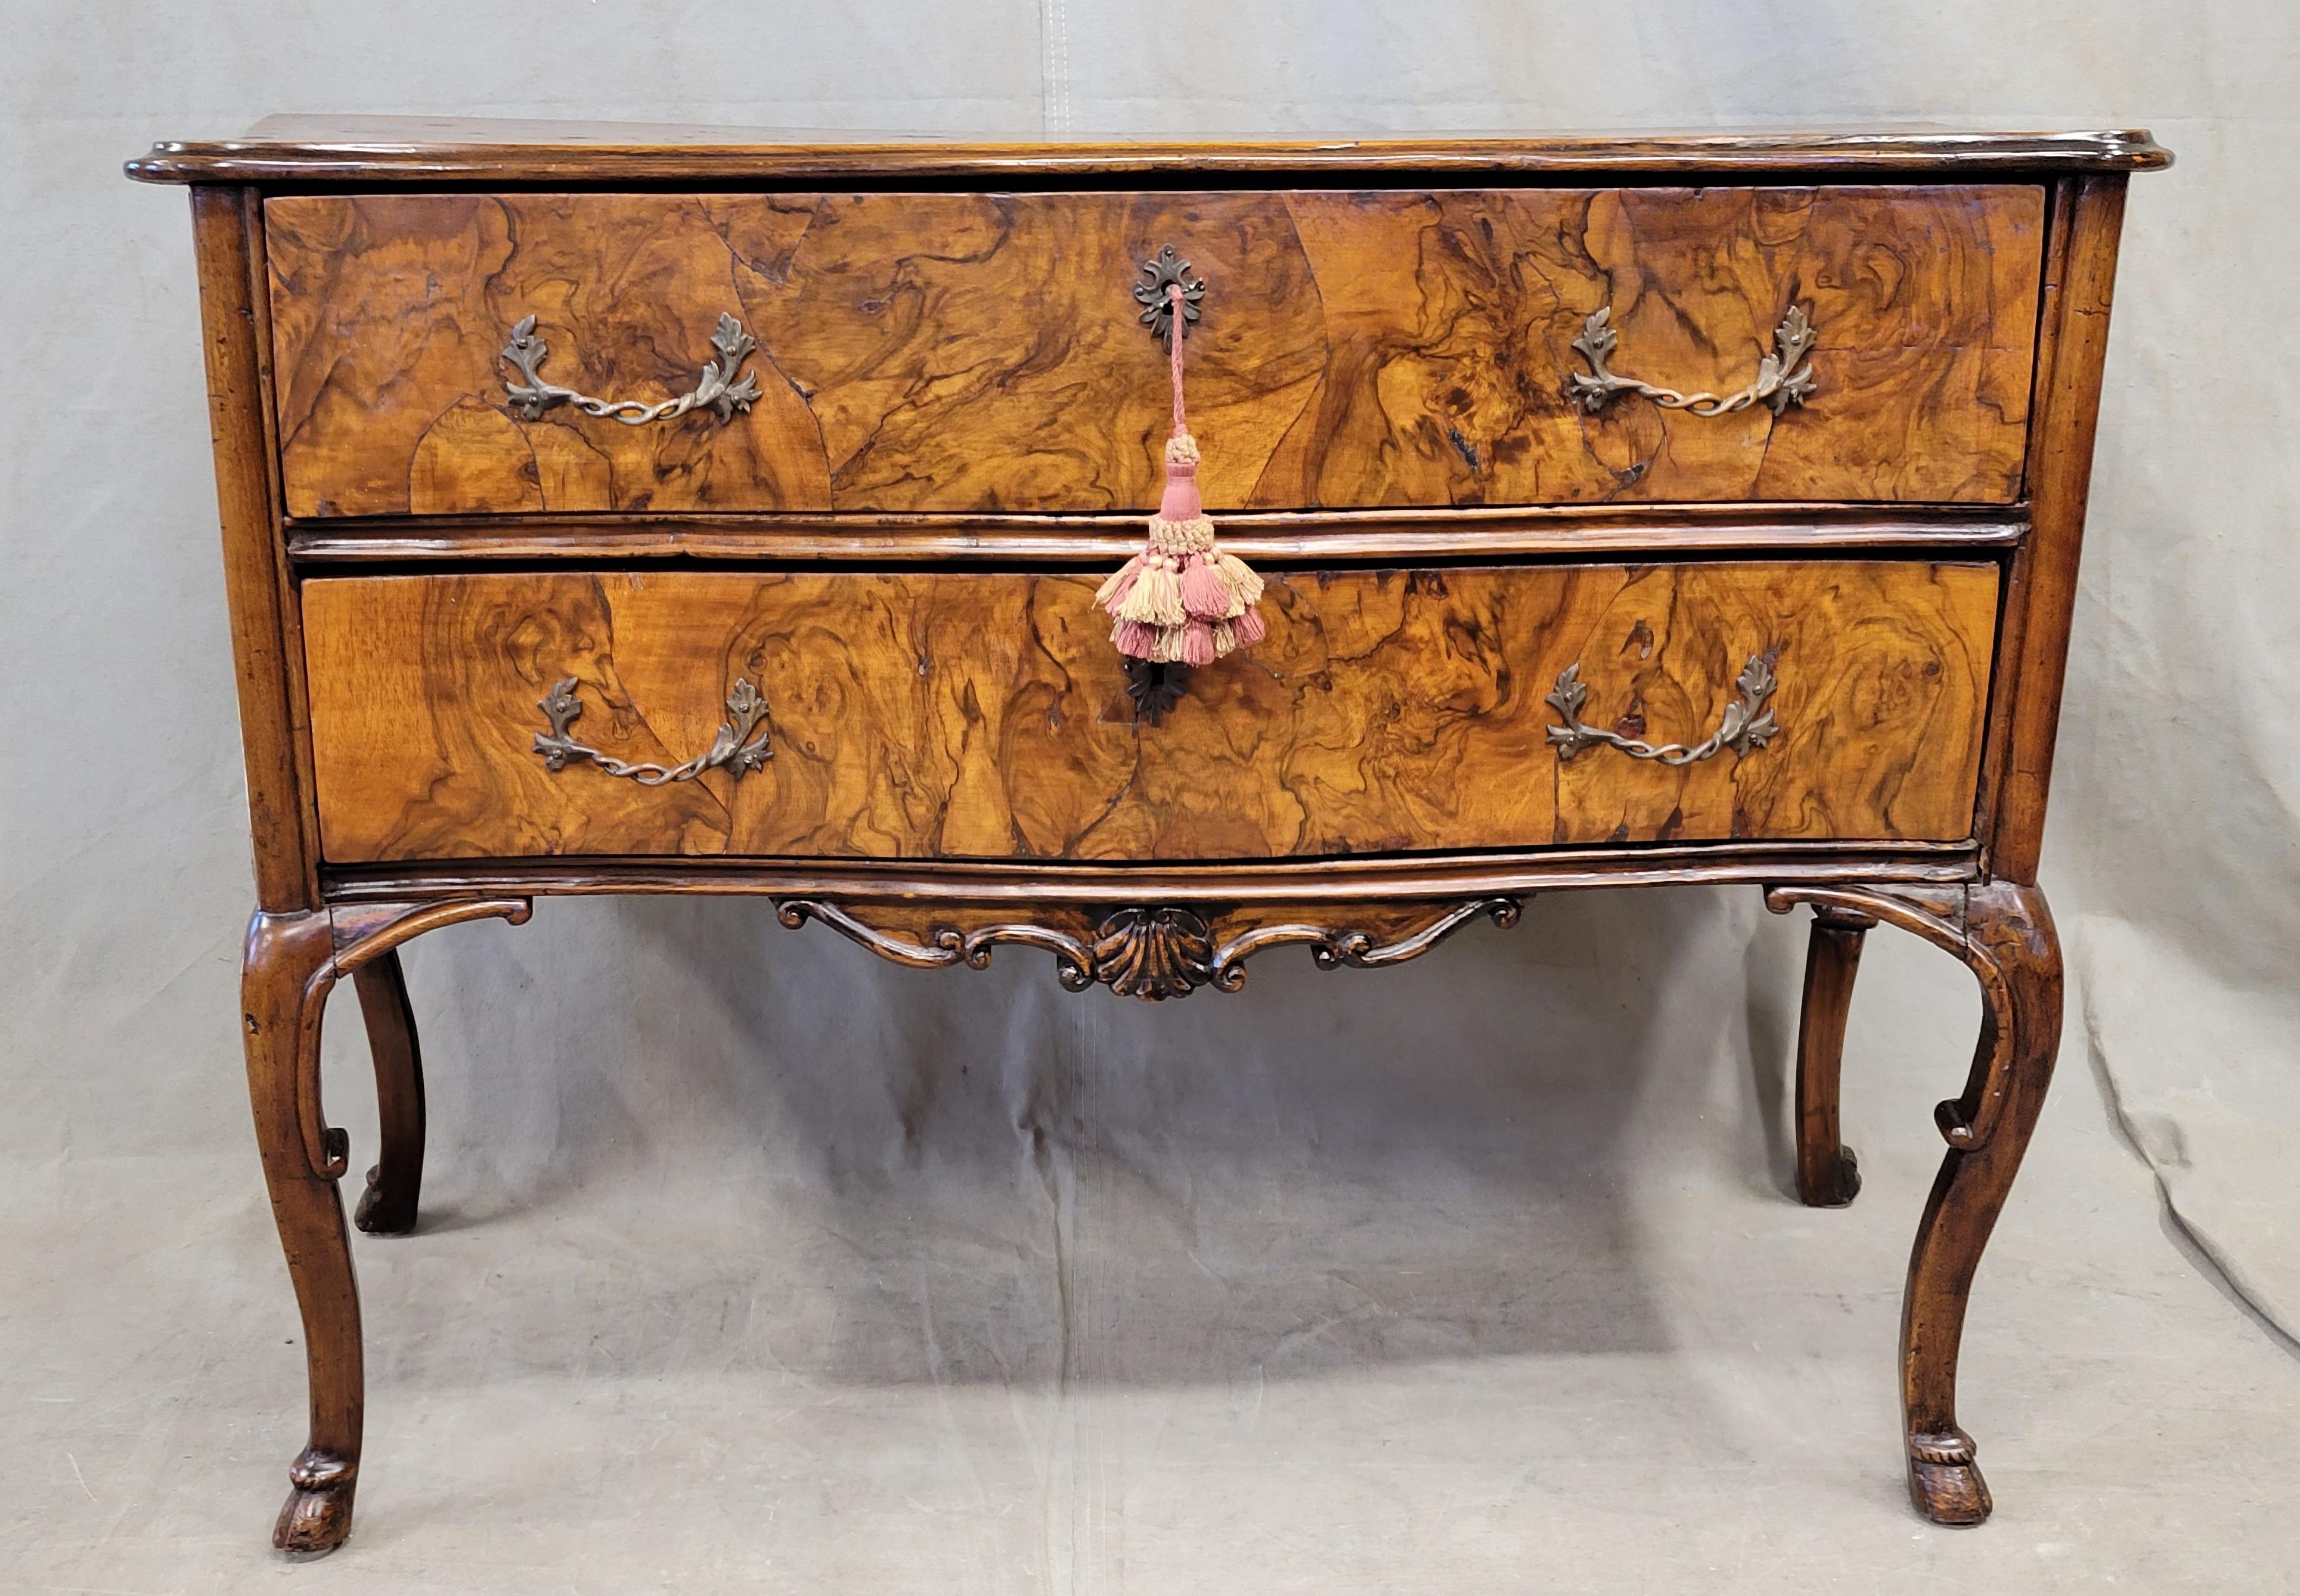 A gorgeous, antique late 1700s or early 1800s French burl walnut commode with cabriole legs and deer hoof feet (pied-de-biche); in the shape of Louis XV commodes but with a more rustic, French country flair. Old fill in the bookmatched walnut burl